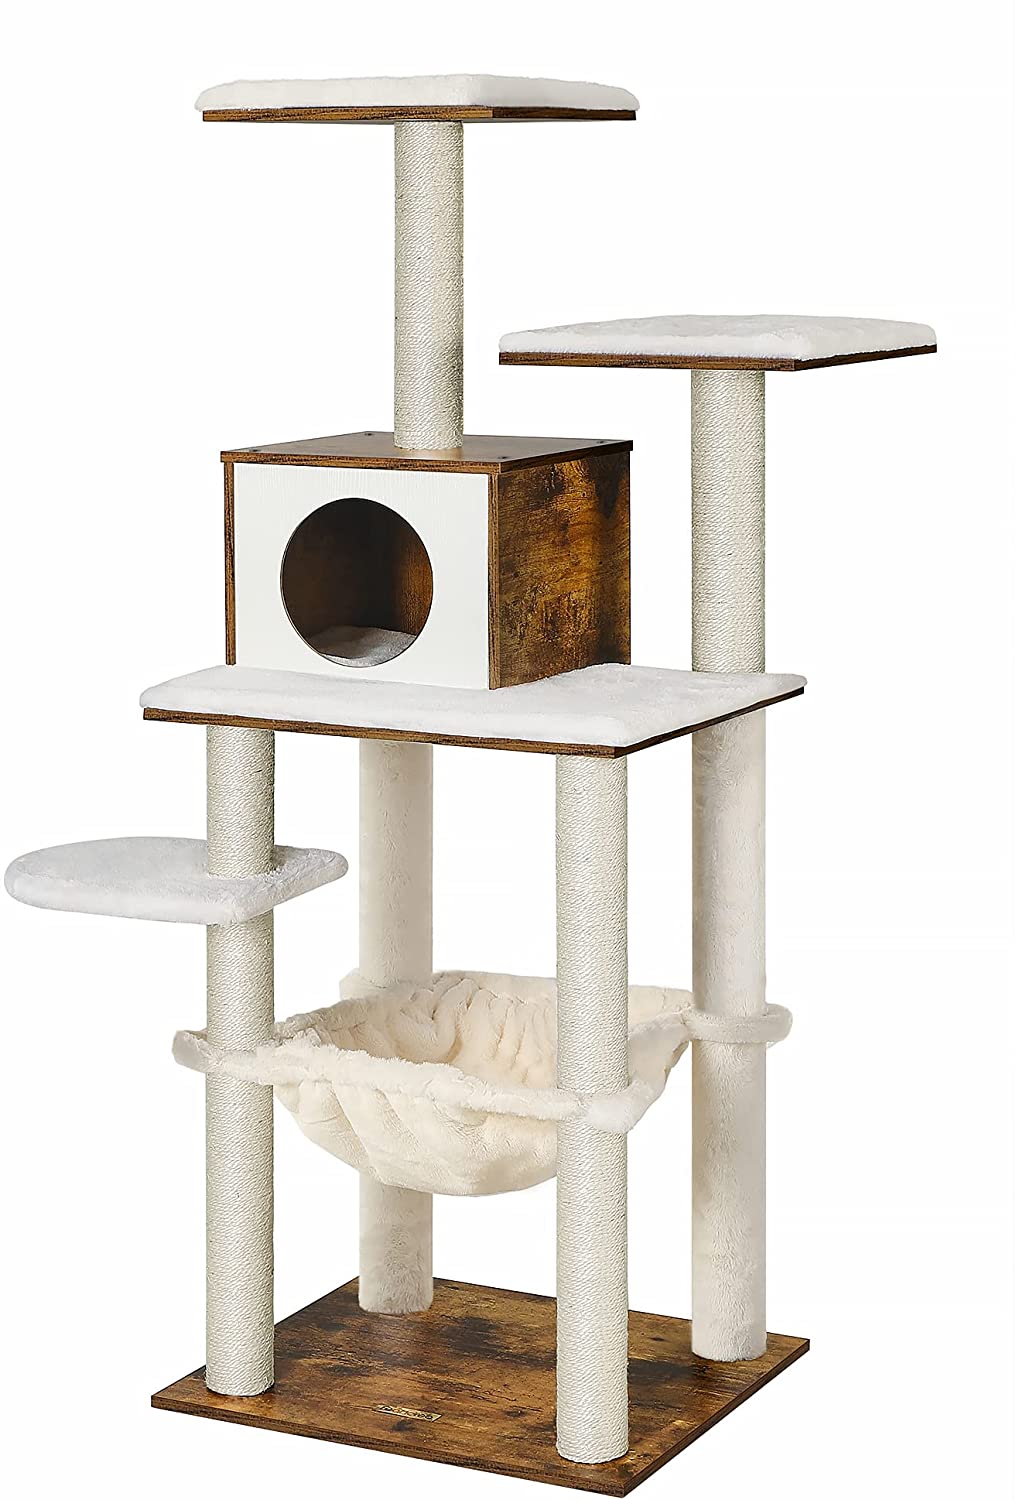 Nancy's Tampis Scratching Post for Cats - Cat Scratching Post - Cat Scratching Post - Modern - Vintage Brown - 55 x 45 x 138 cm